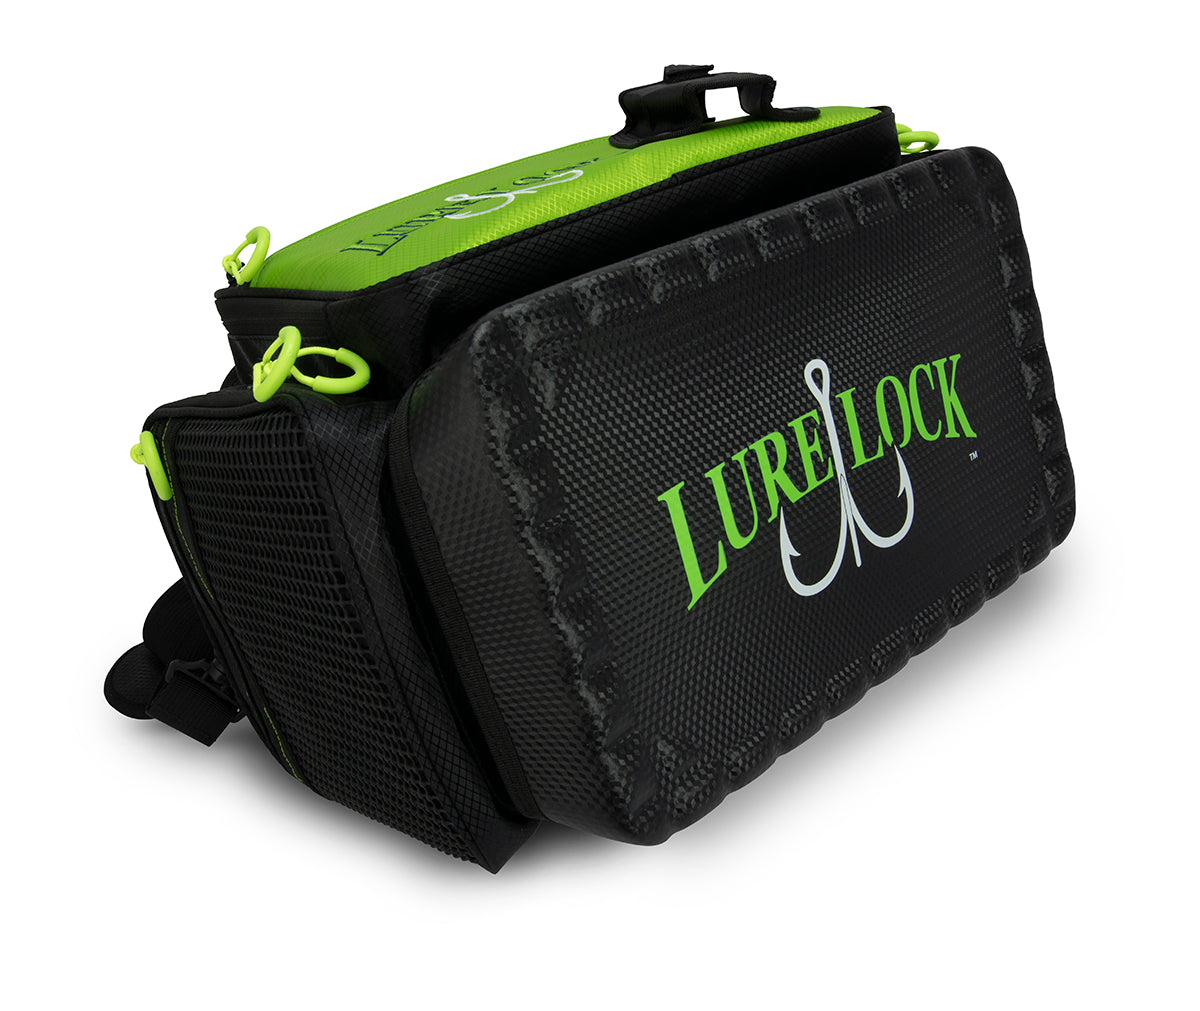 Lure Lock Roll-Up Fishing Lure Bag (HONEST REVIEW) 